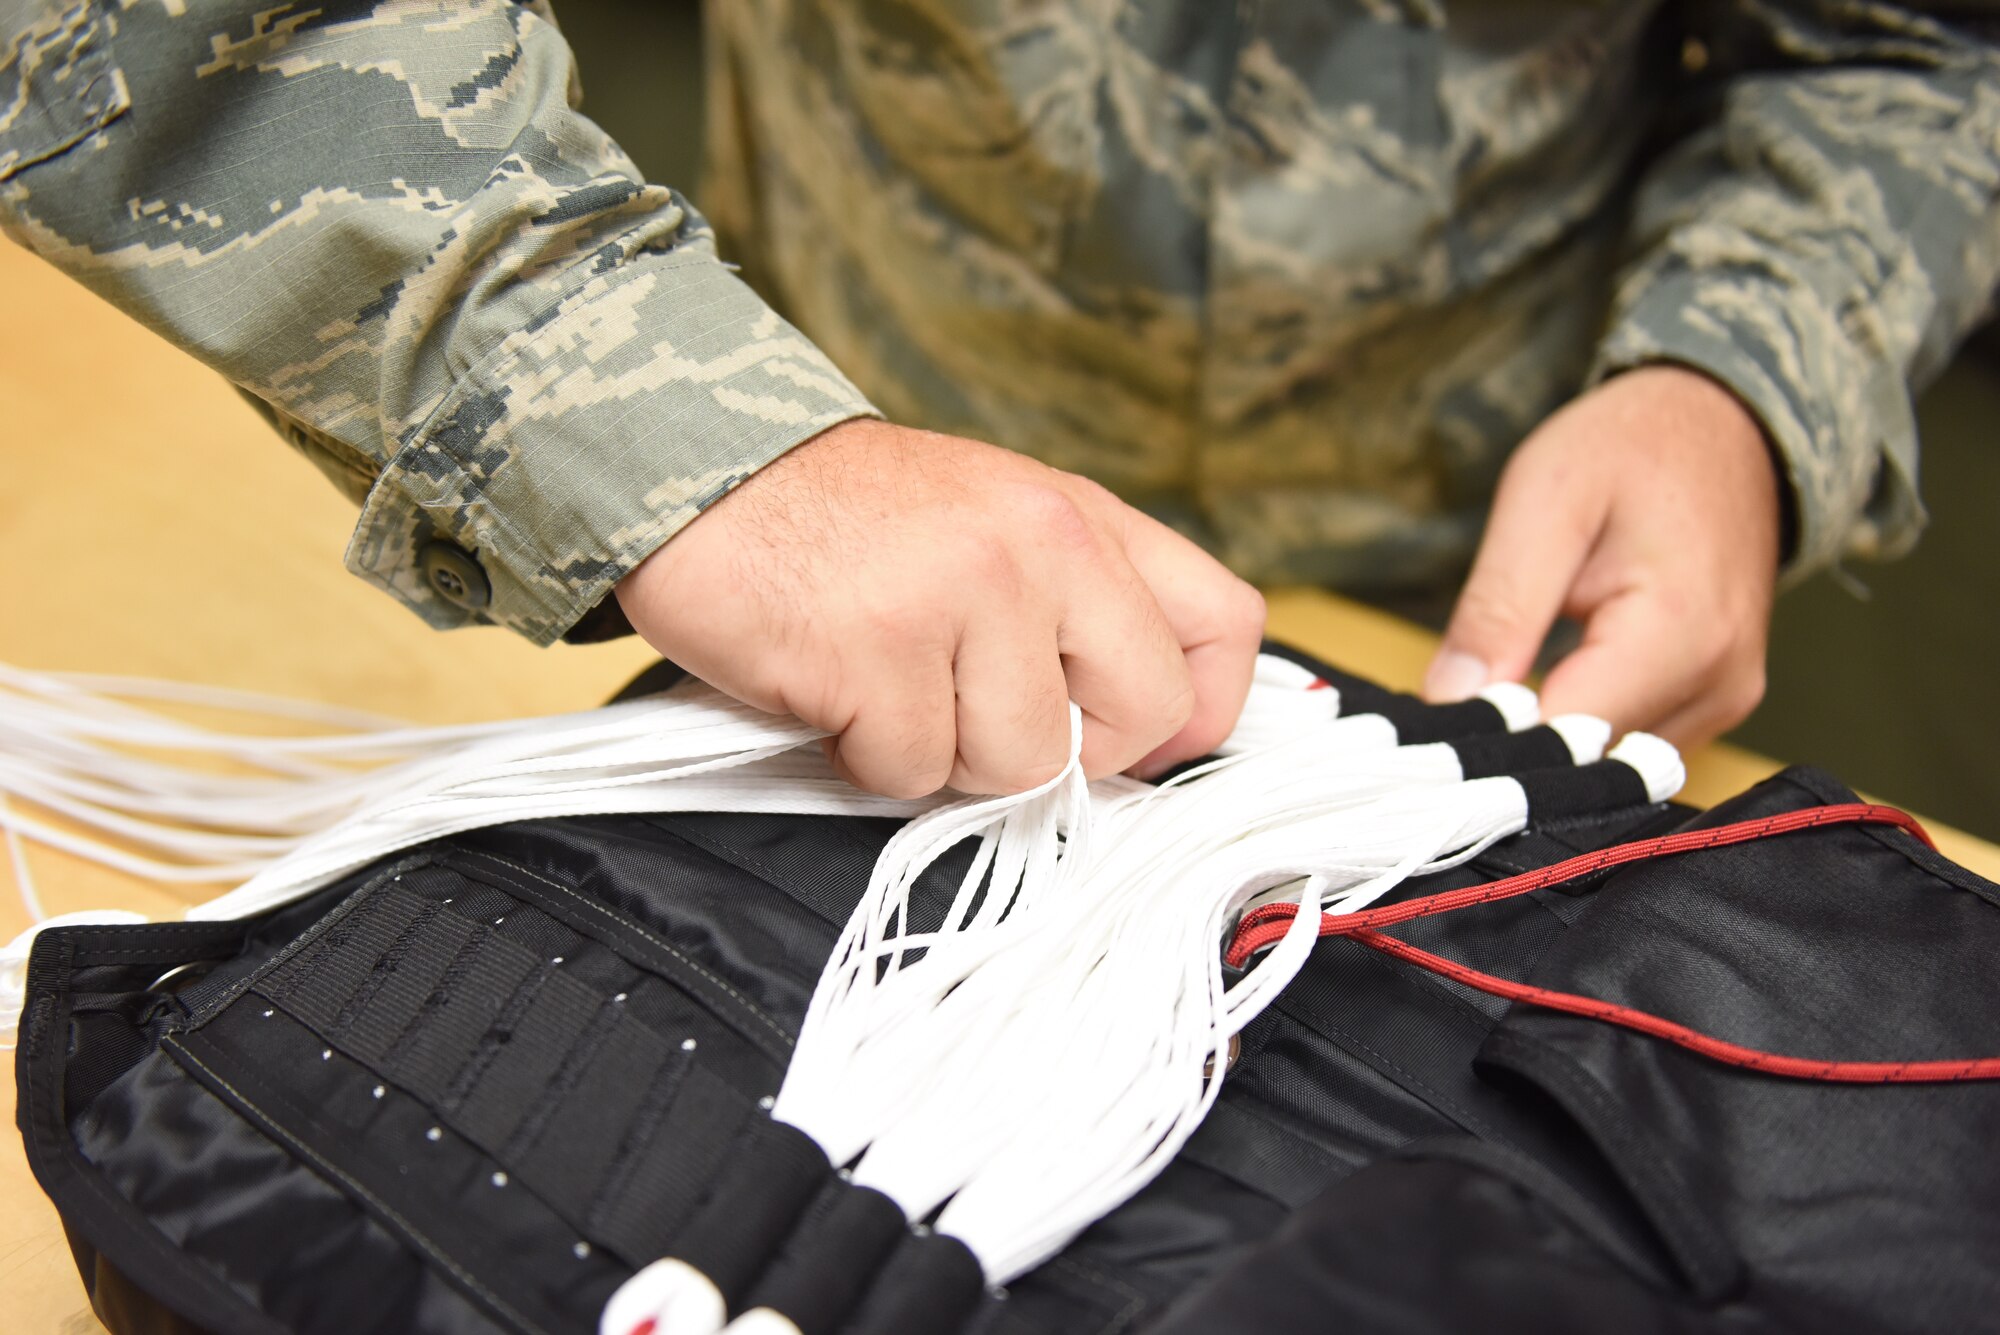 Staff Sgt. Stephen Falker, an aircrew flight equipment technician with the 193rd Special Operations Support Squadron, Middletown, Pennsylvania, Pennsylvania Air National Guard, builds a Low-Profile Parachute from scratch Aug. 9, 2018. The new parachutes replaced the old ones, which were originally constructed in the 1980’s. (U.S. Air National Guard photo by Senior Airman Julia Sorber/Released)